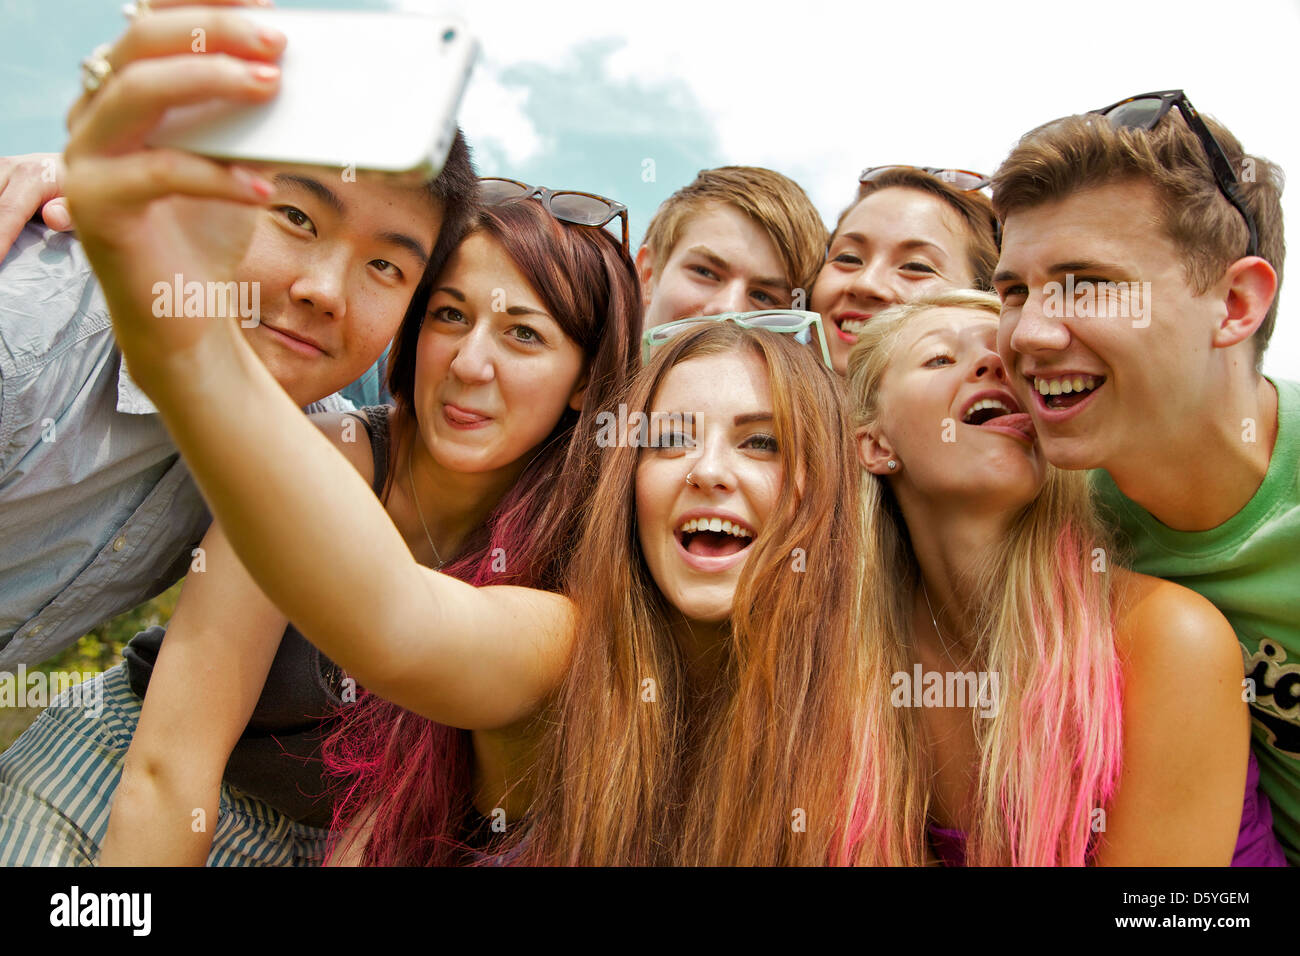 Group of Teenagers Taking Self Portrait Photo at Music Festival Stock Photo